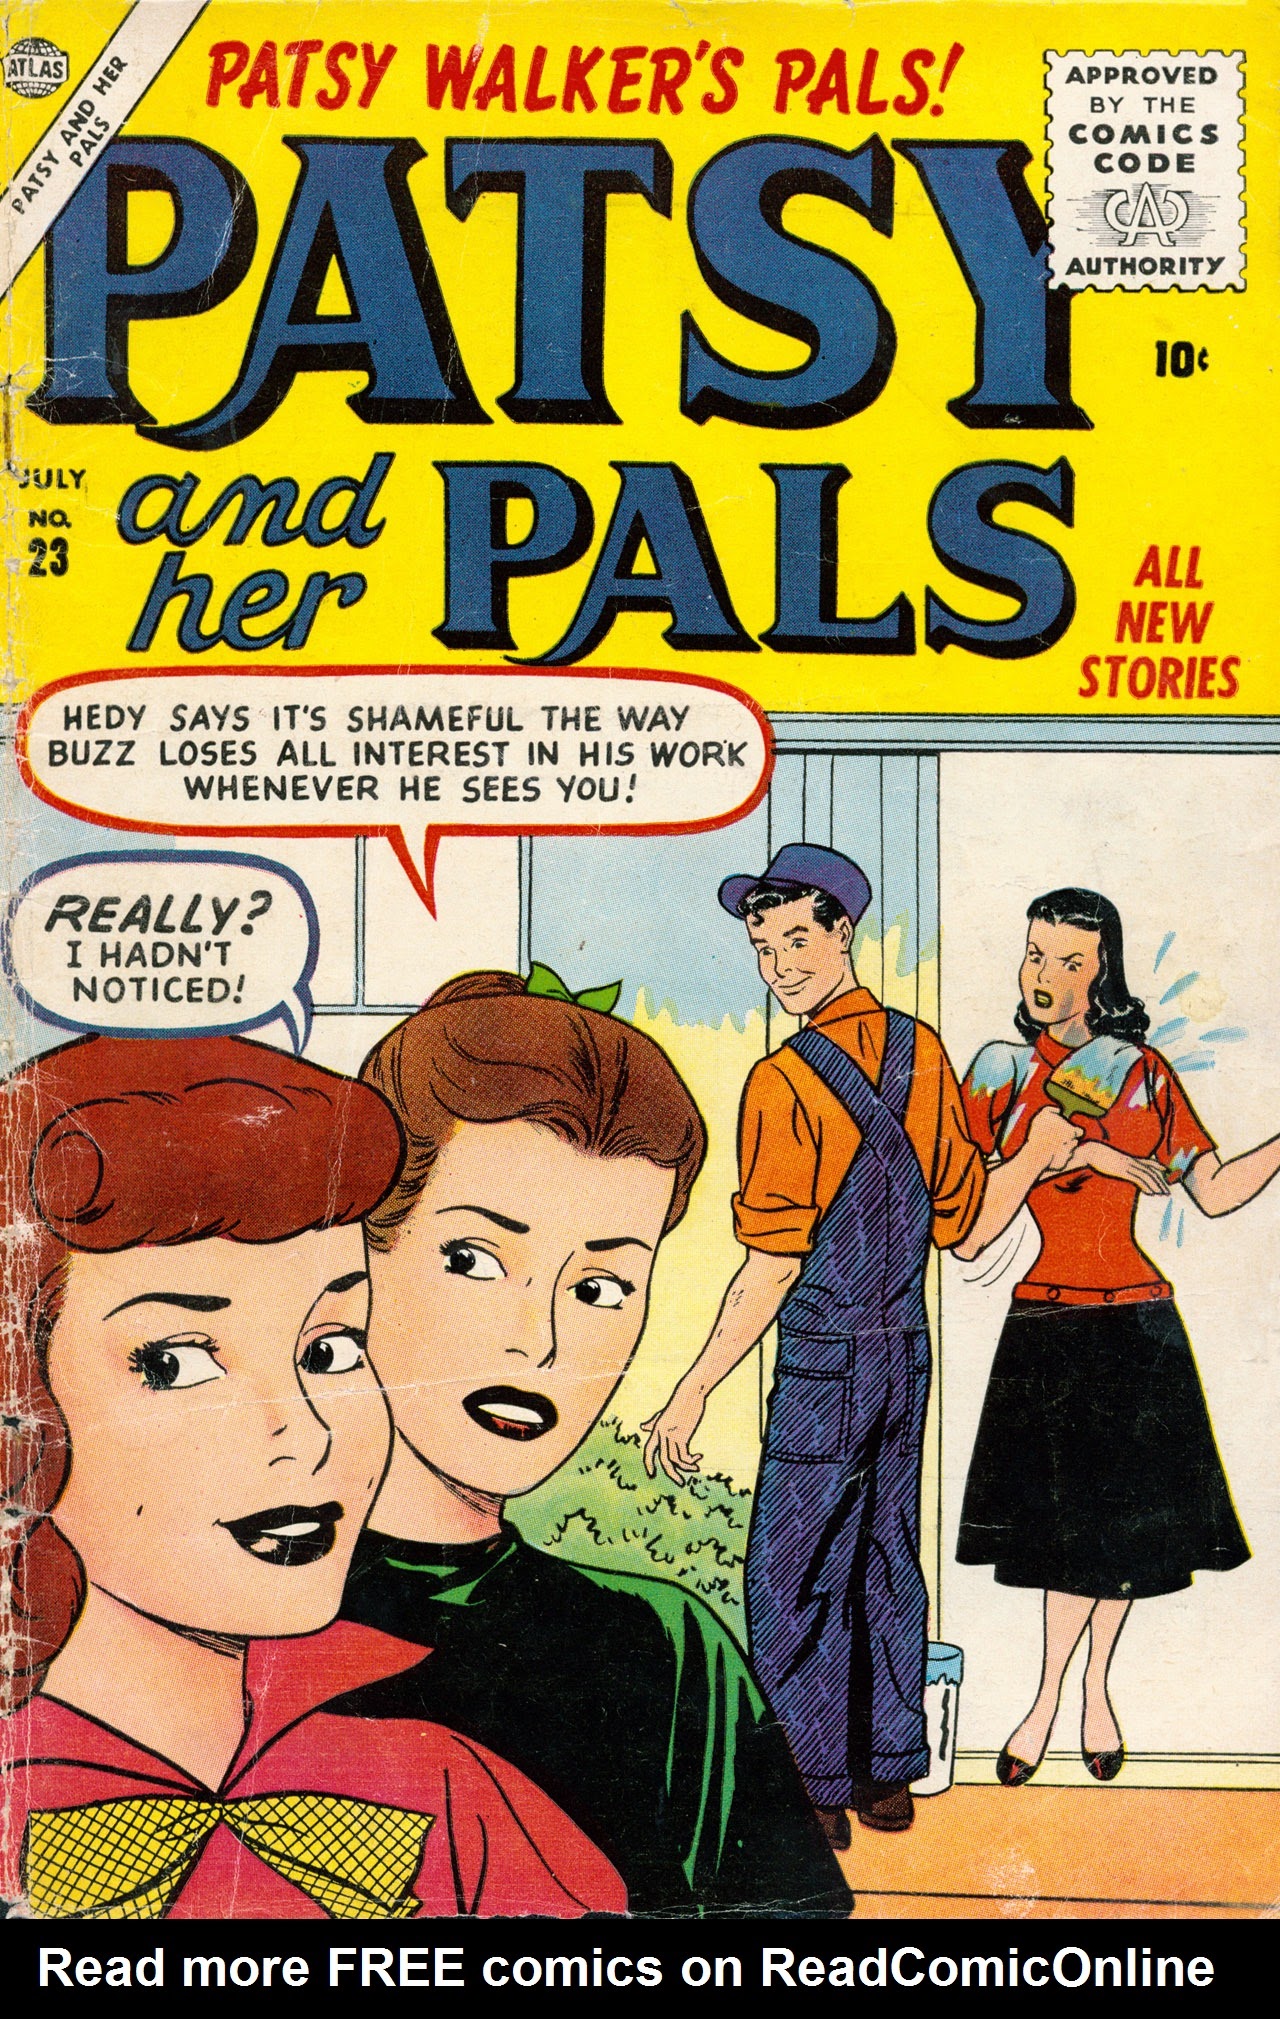 Read online Patsy and her Pals comic -  Issue #23 - 1